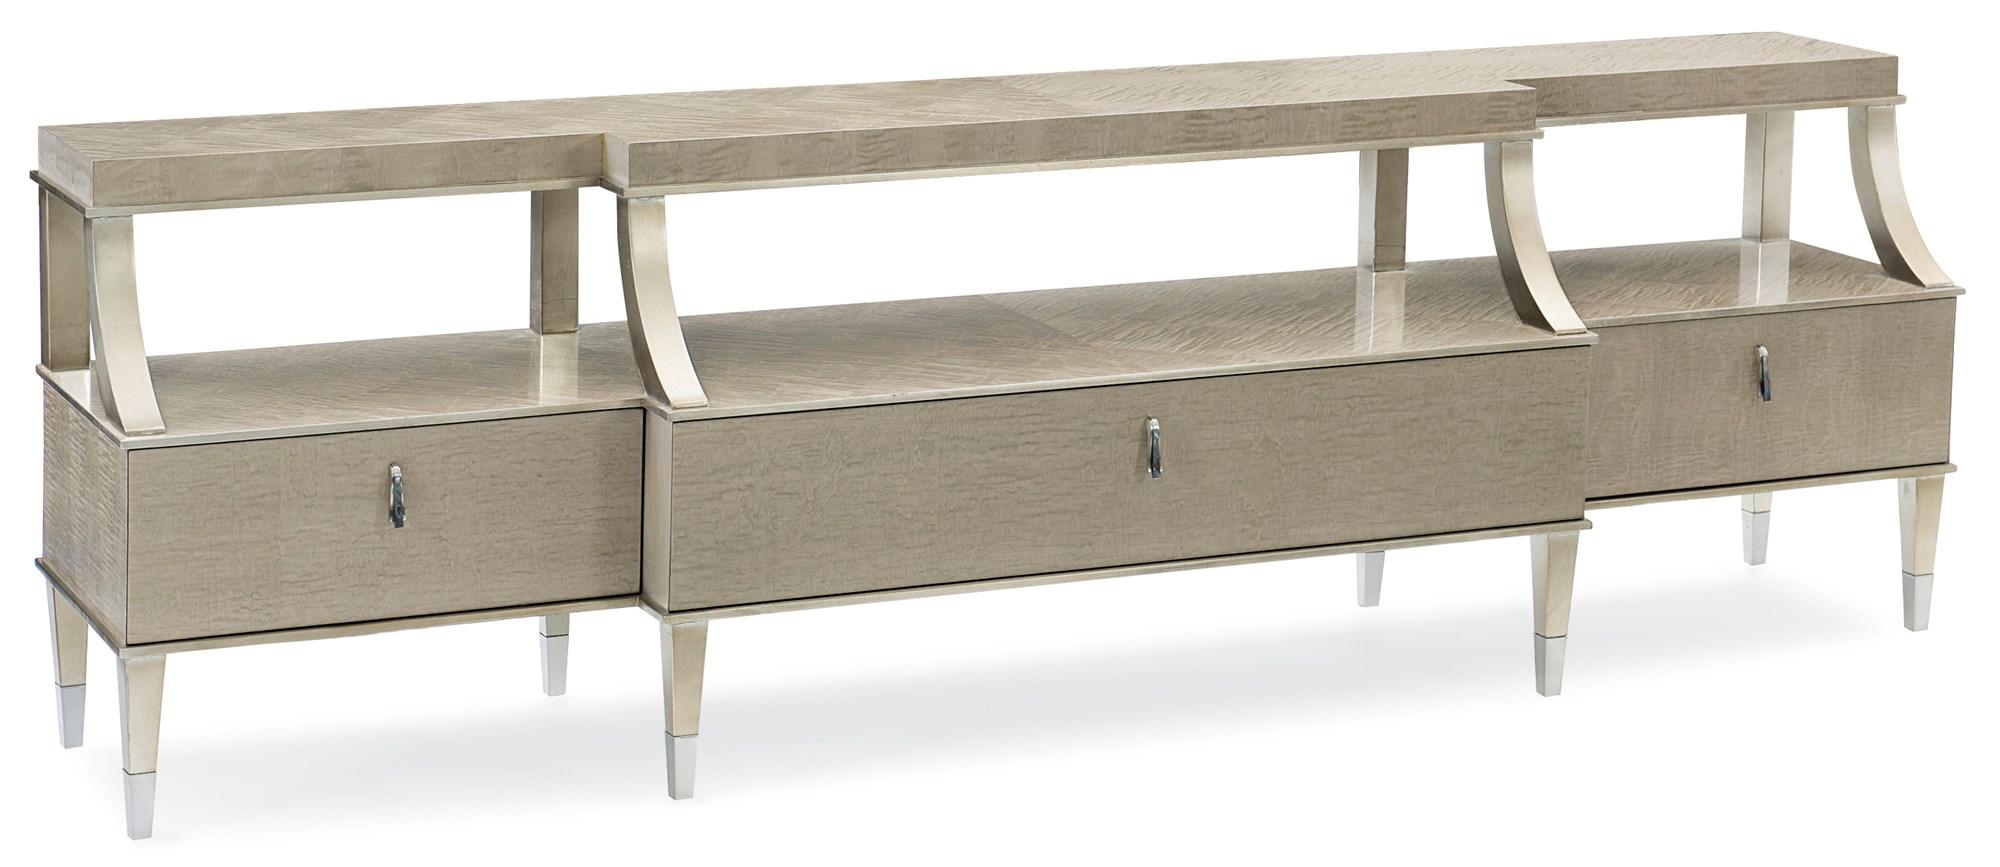 Contemporary Console Table Set SHELF APPEAL CLA-417-531 in Silver, Beige 